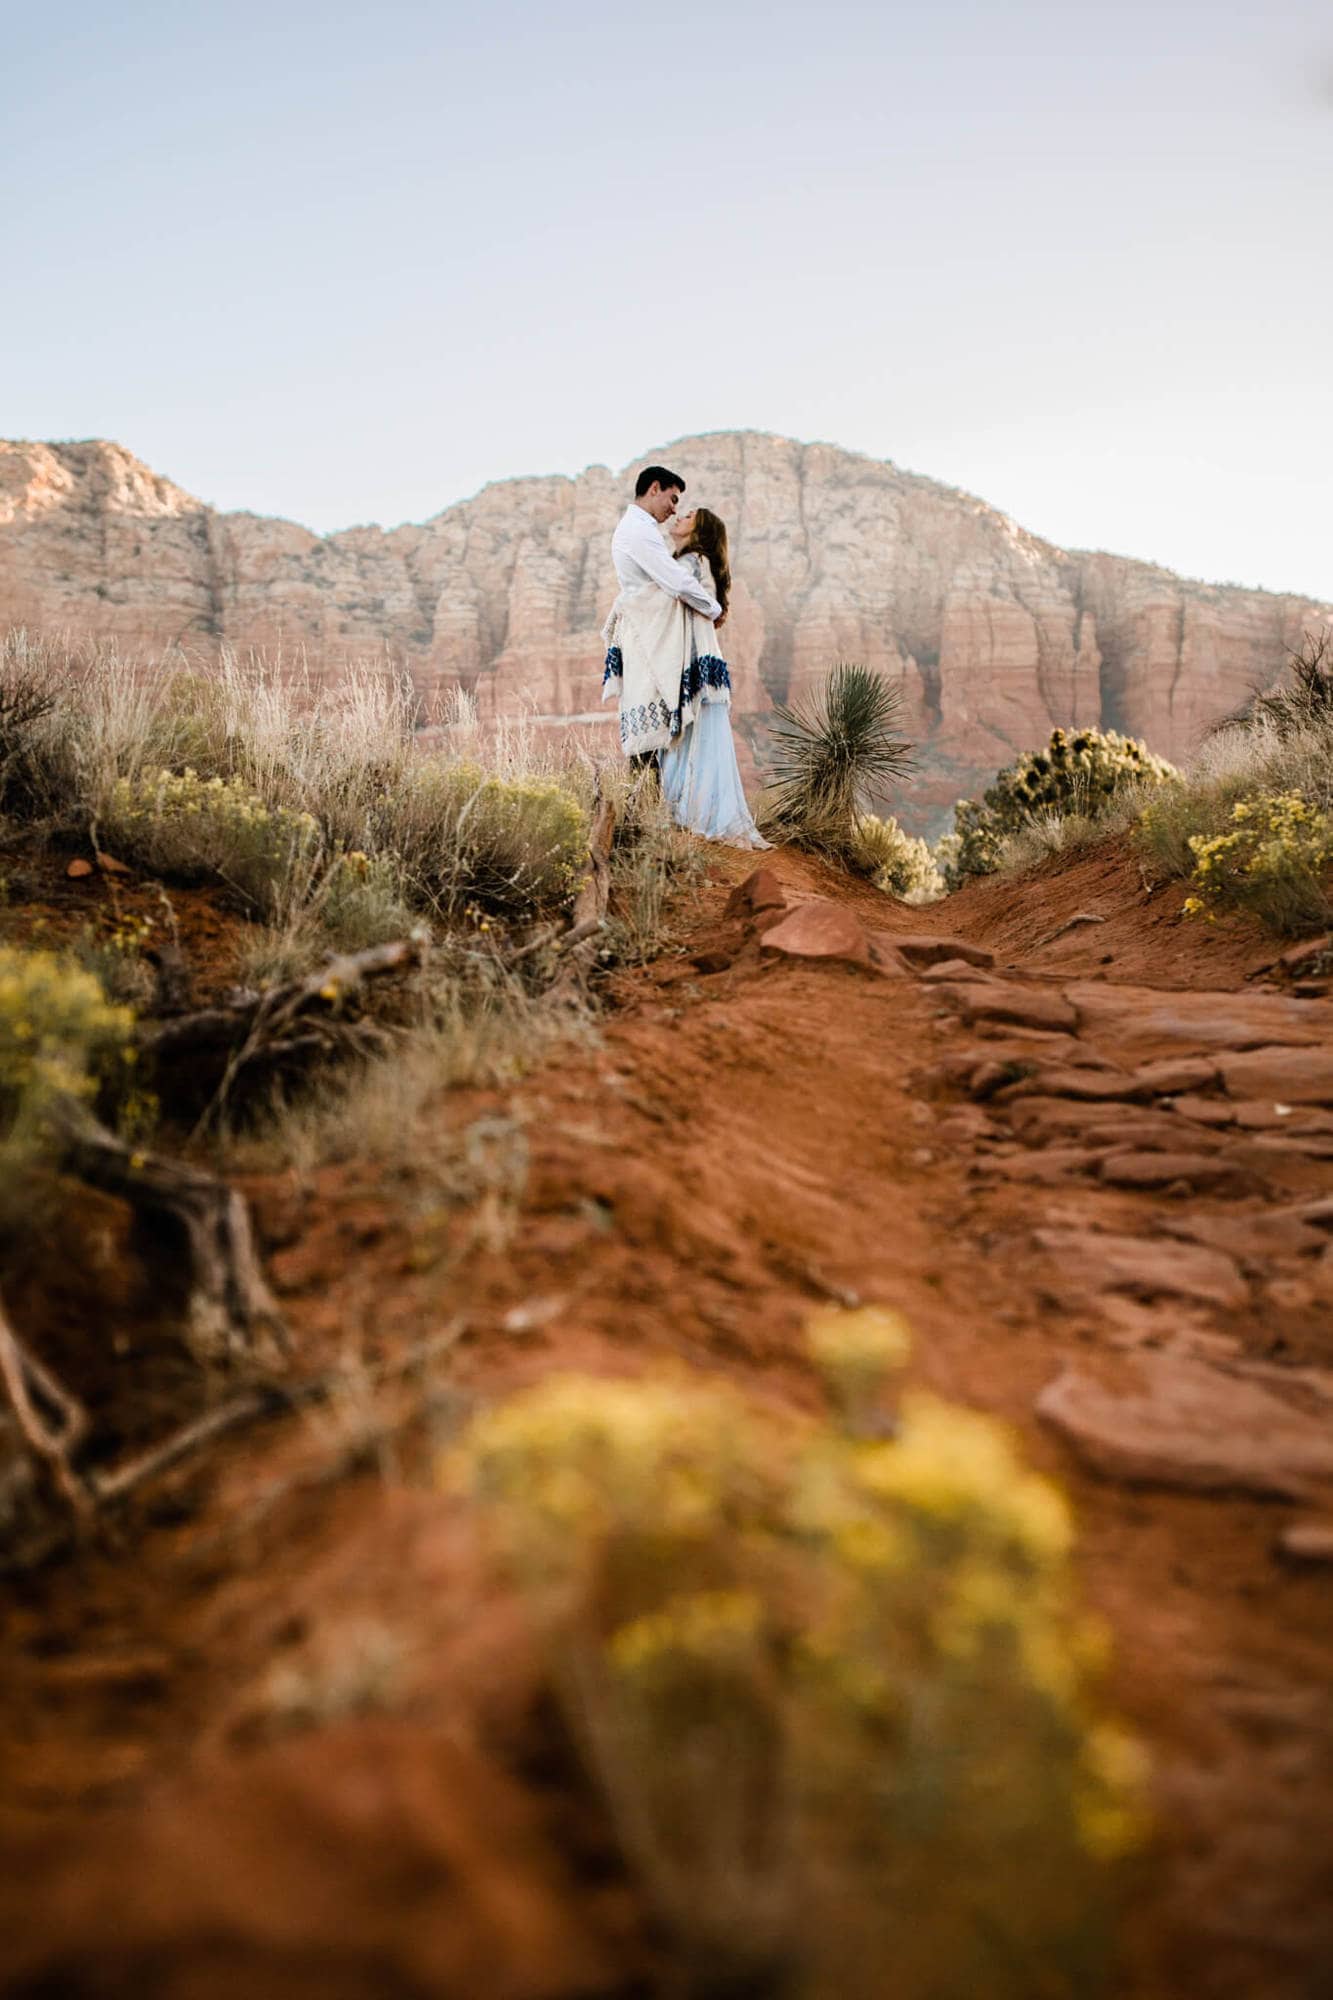 Standing on a hill and framed by the red mountains behind them, the bride and groom hug.